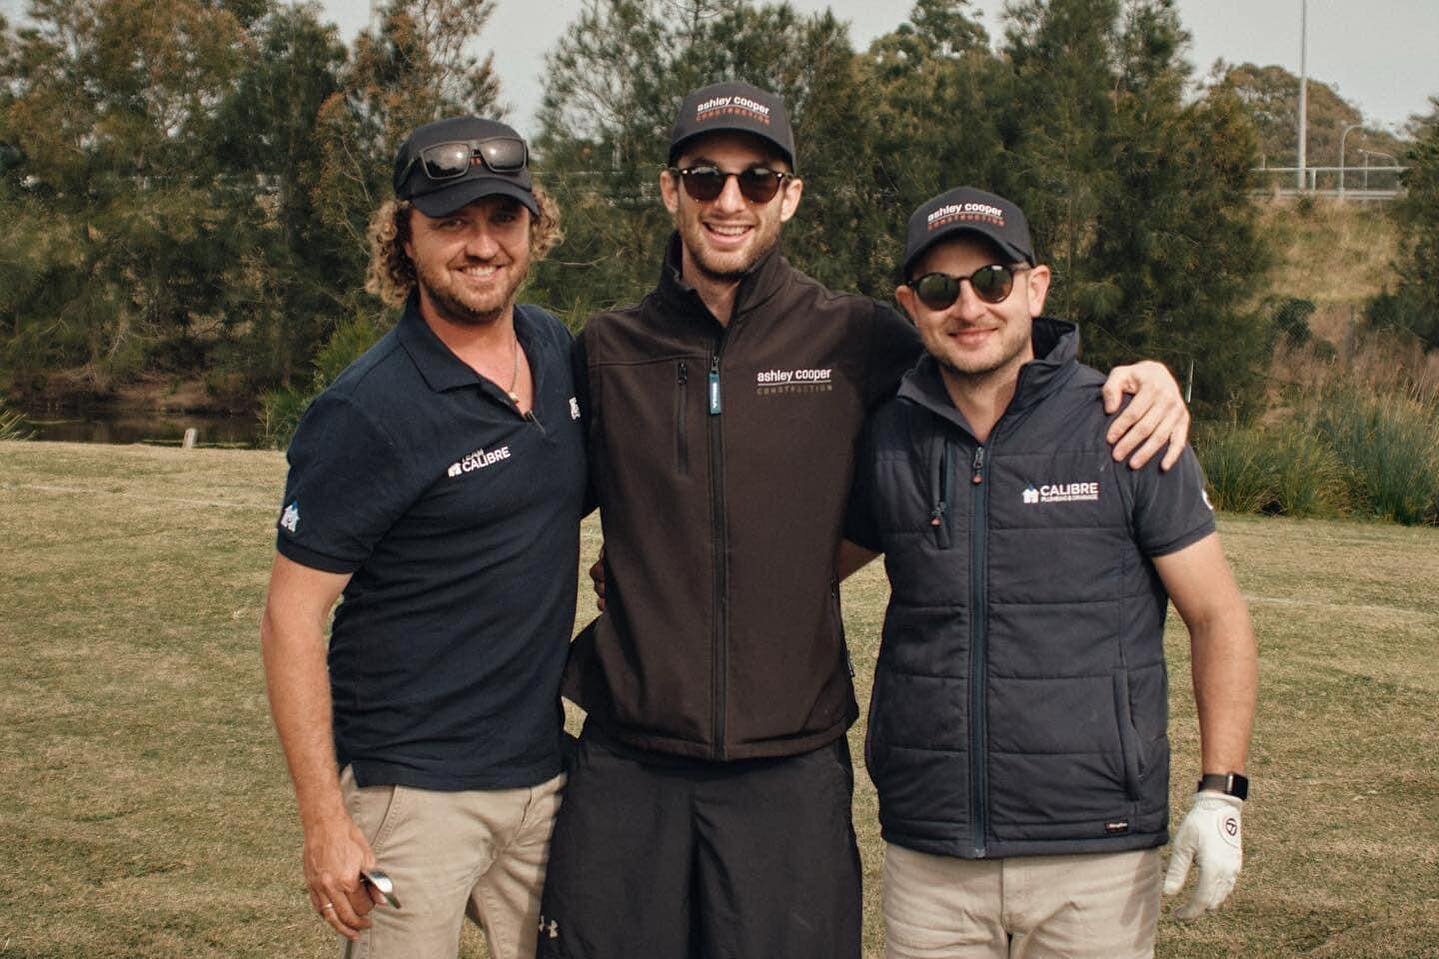 A big thankyou to @ashley_cooper_construction  for having team Calibre at the annual golf day @nudgeegolfclub .
We had a great day and look forward to continue building successful projects in the future.